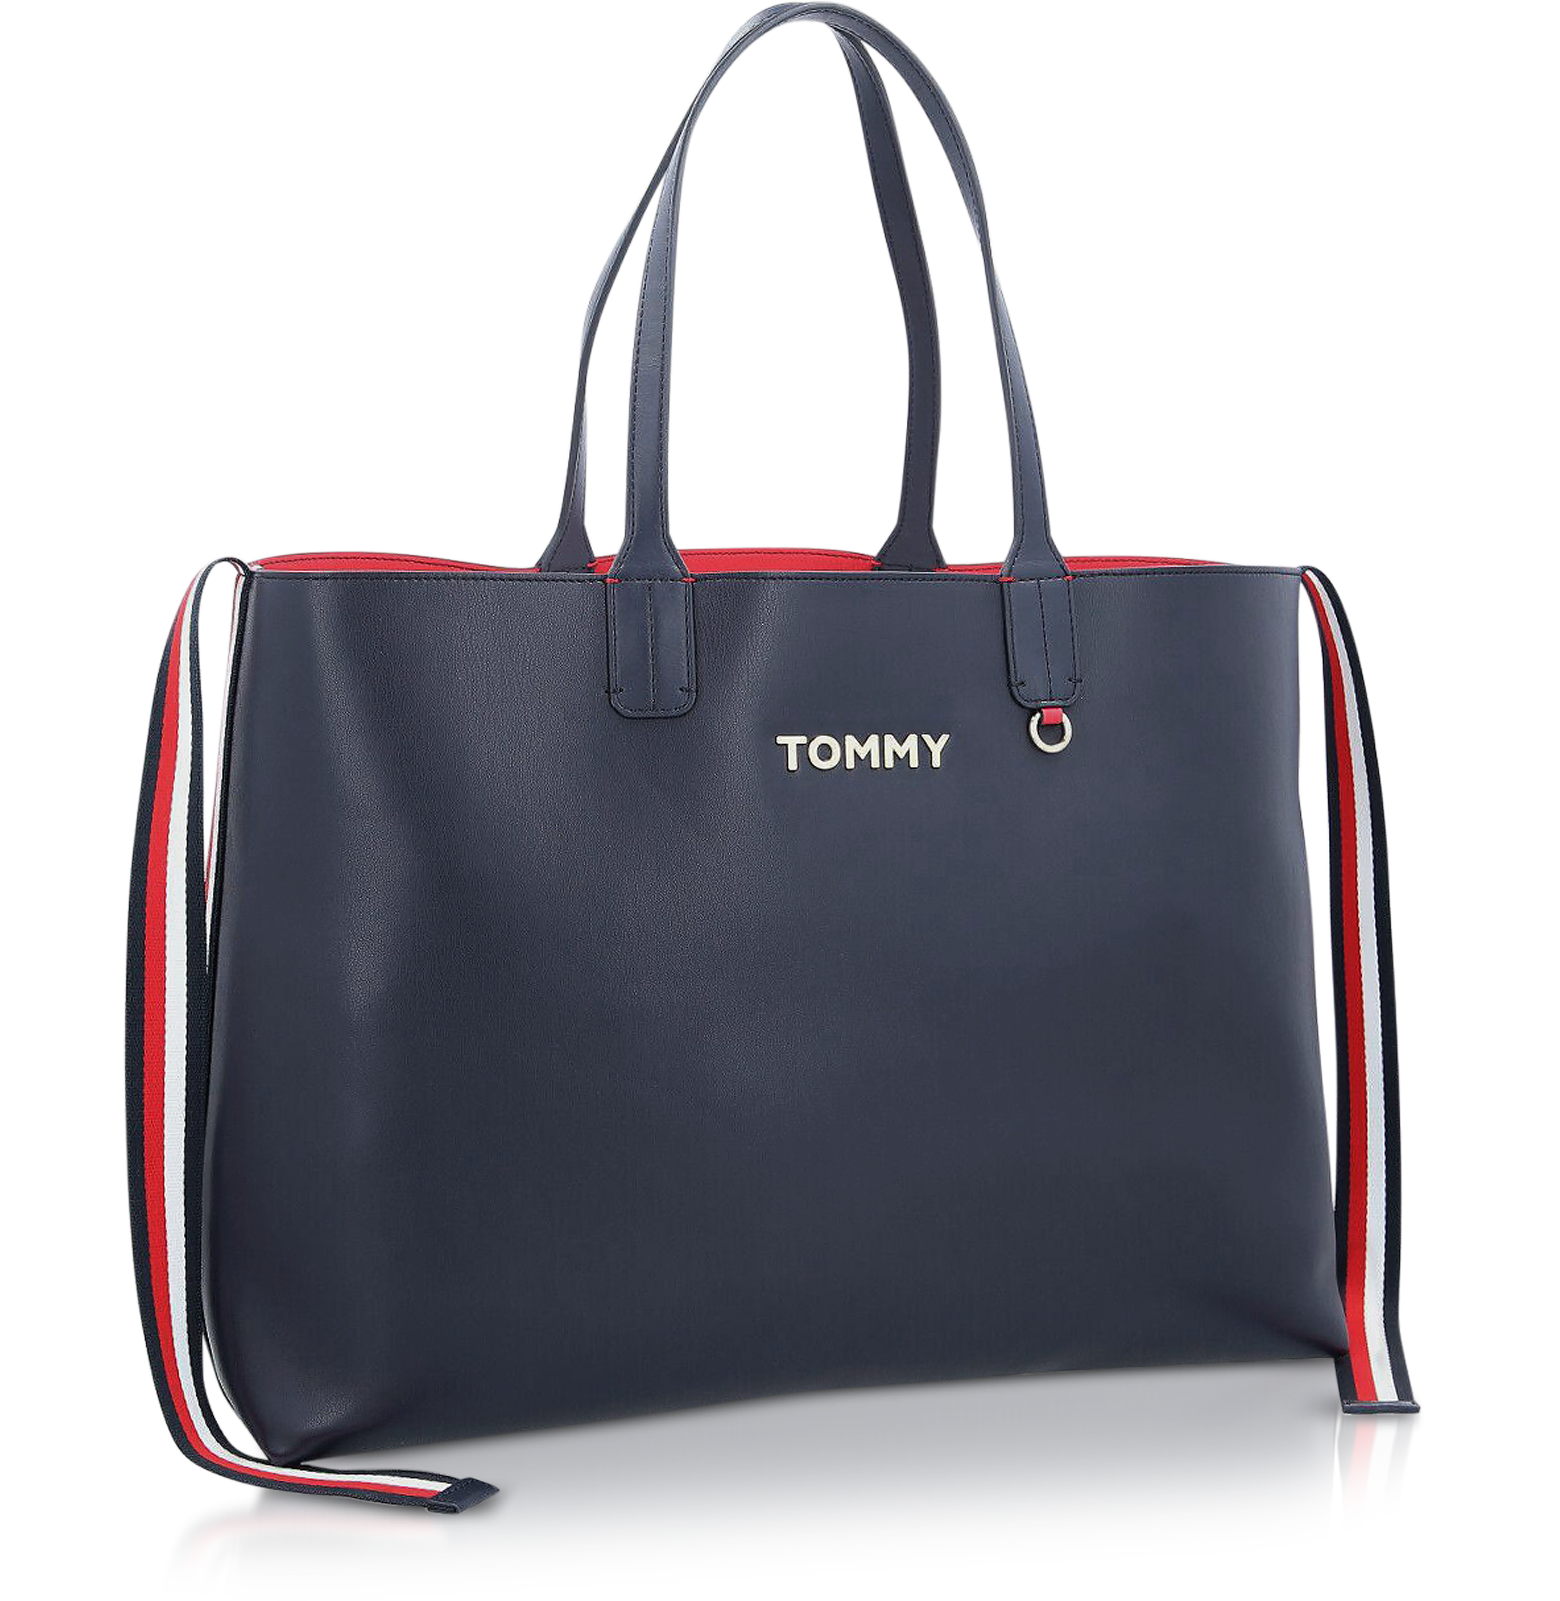 tommy tote bag